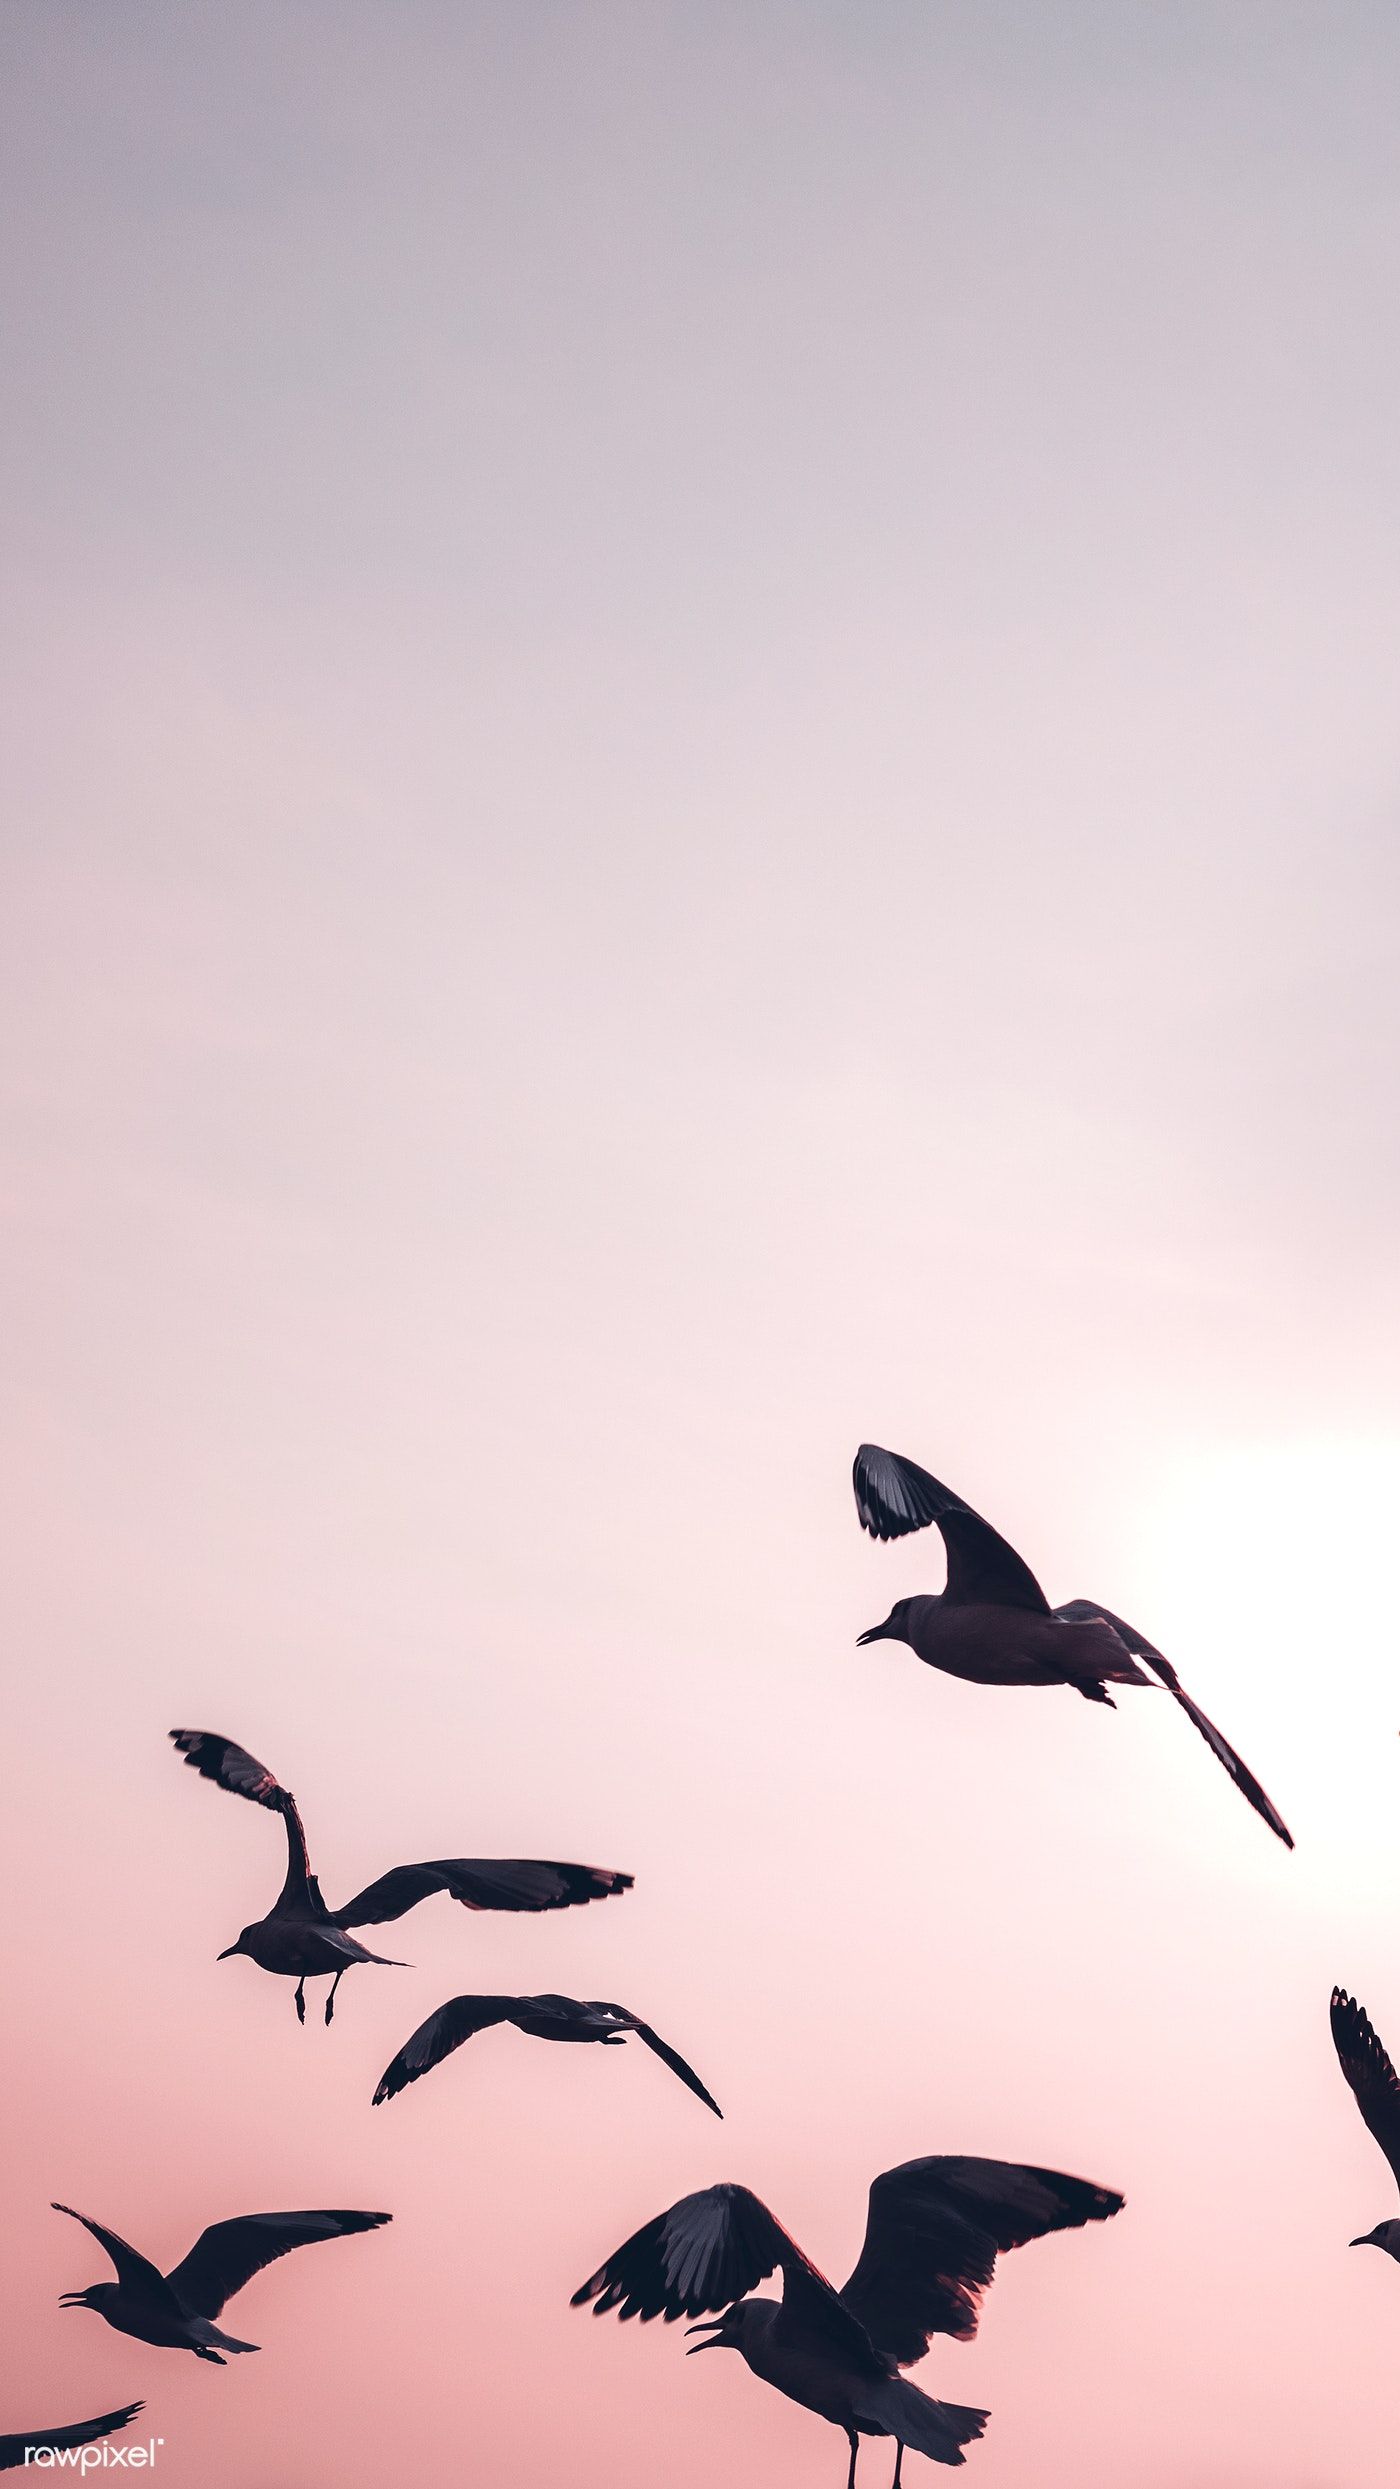 Download premium photo of Flock of seagulls flying in the sky mobile